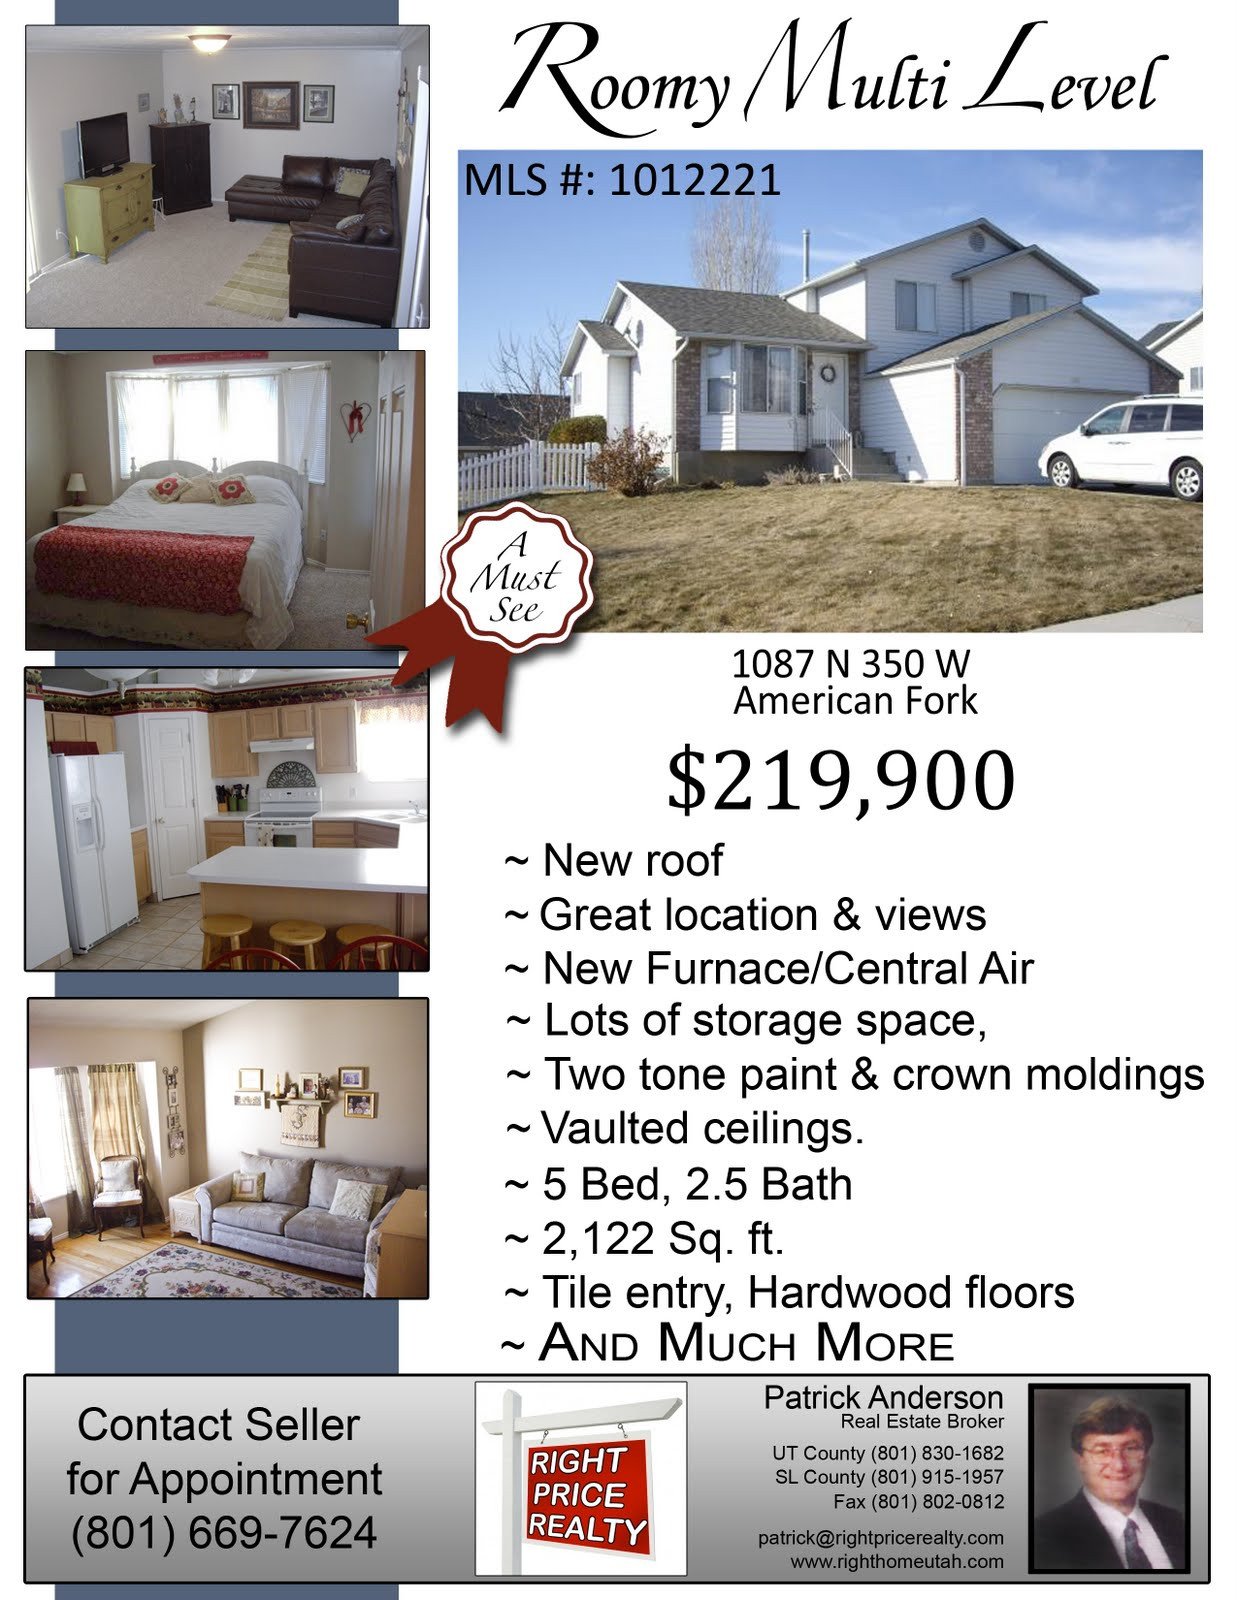 AstinMedia House For Sale Flyer